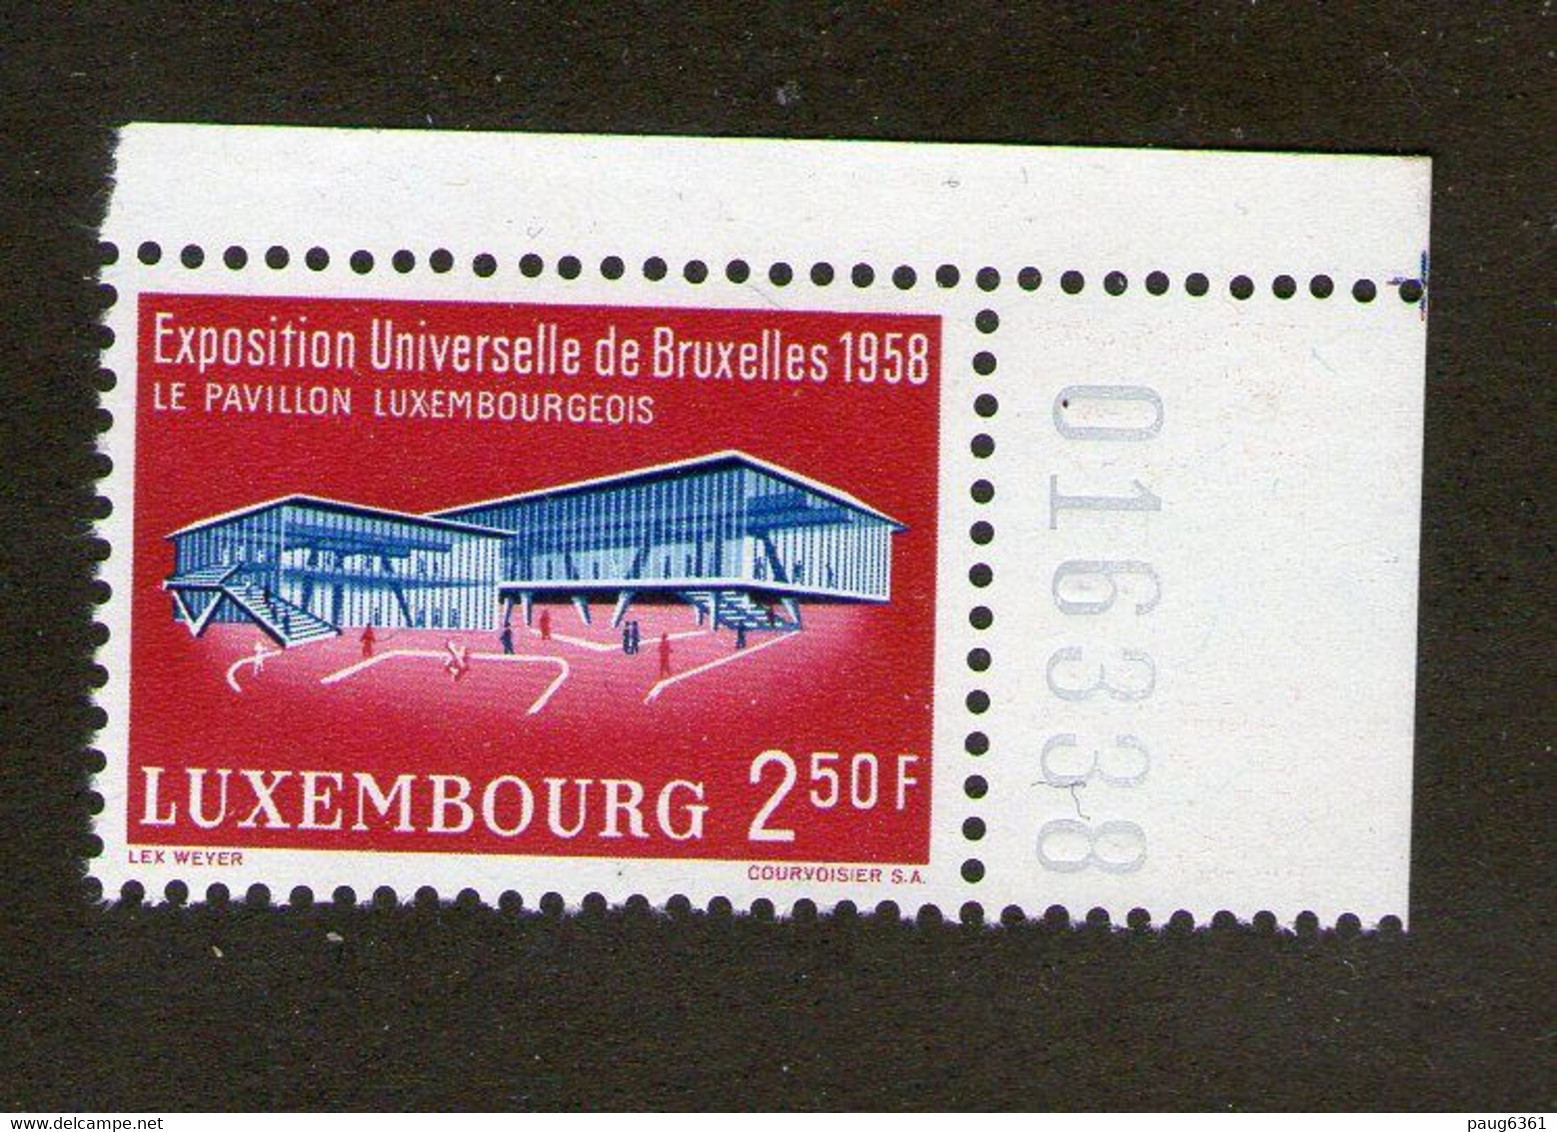 LUXEMBOURG 1958 EXPO BRUXELLES YVERT N°541  NEUF MNH** - 1958 – Brussels (Belgium)